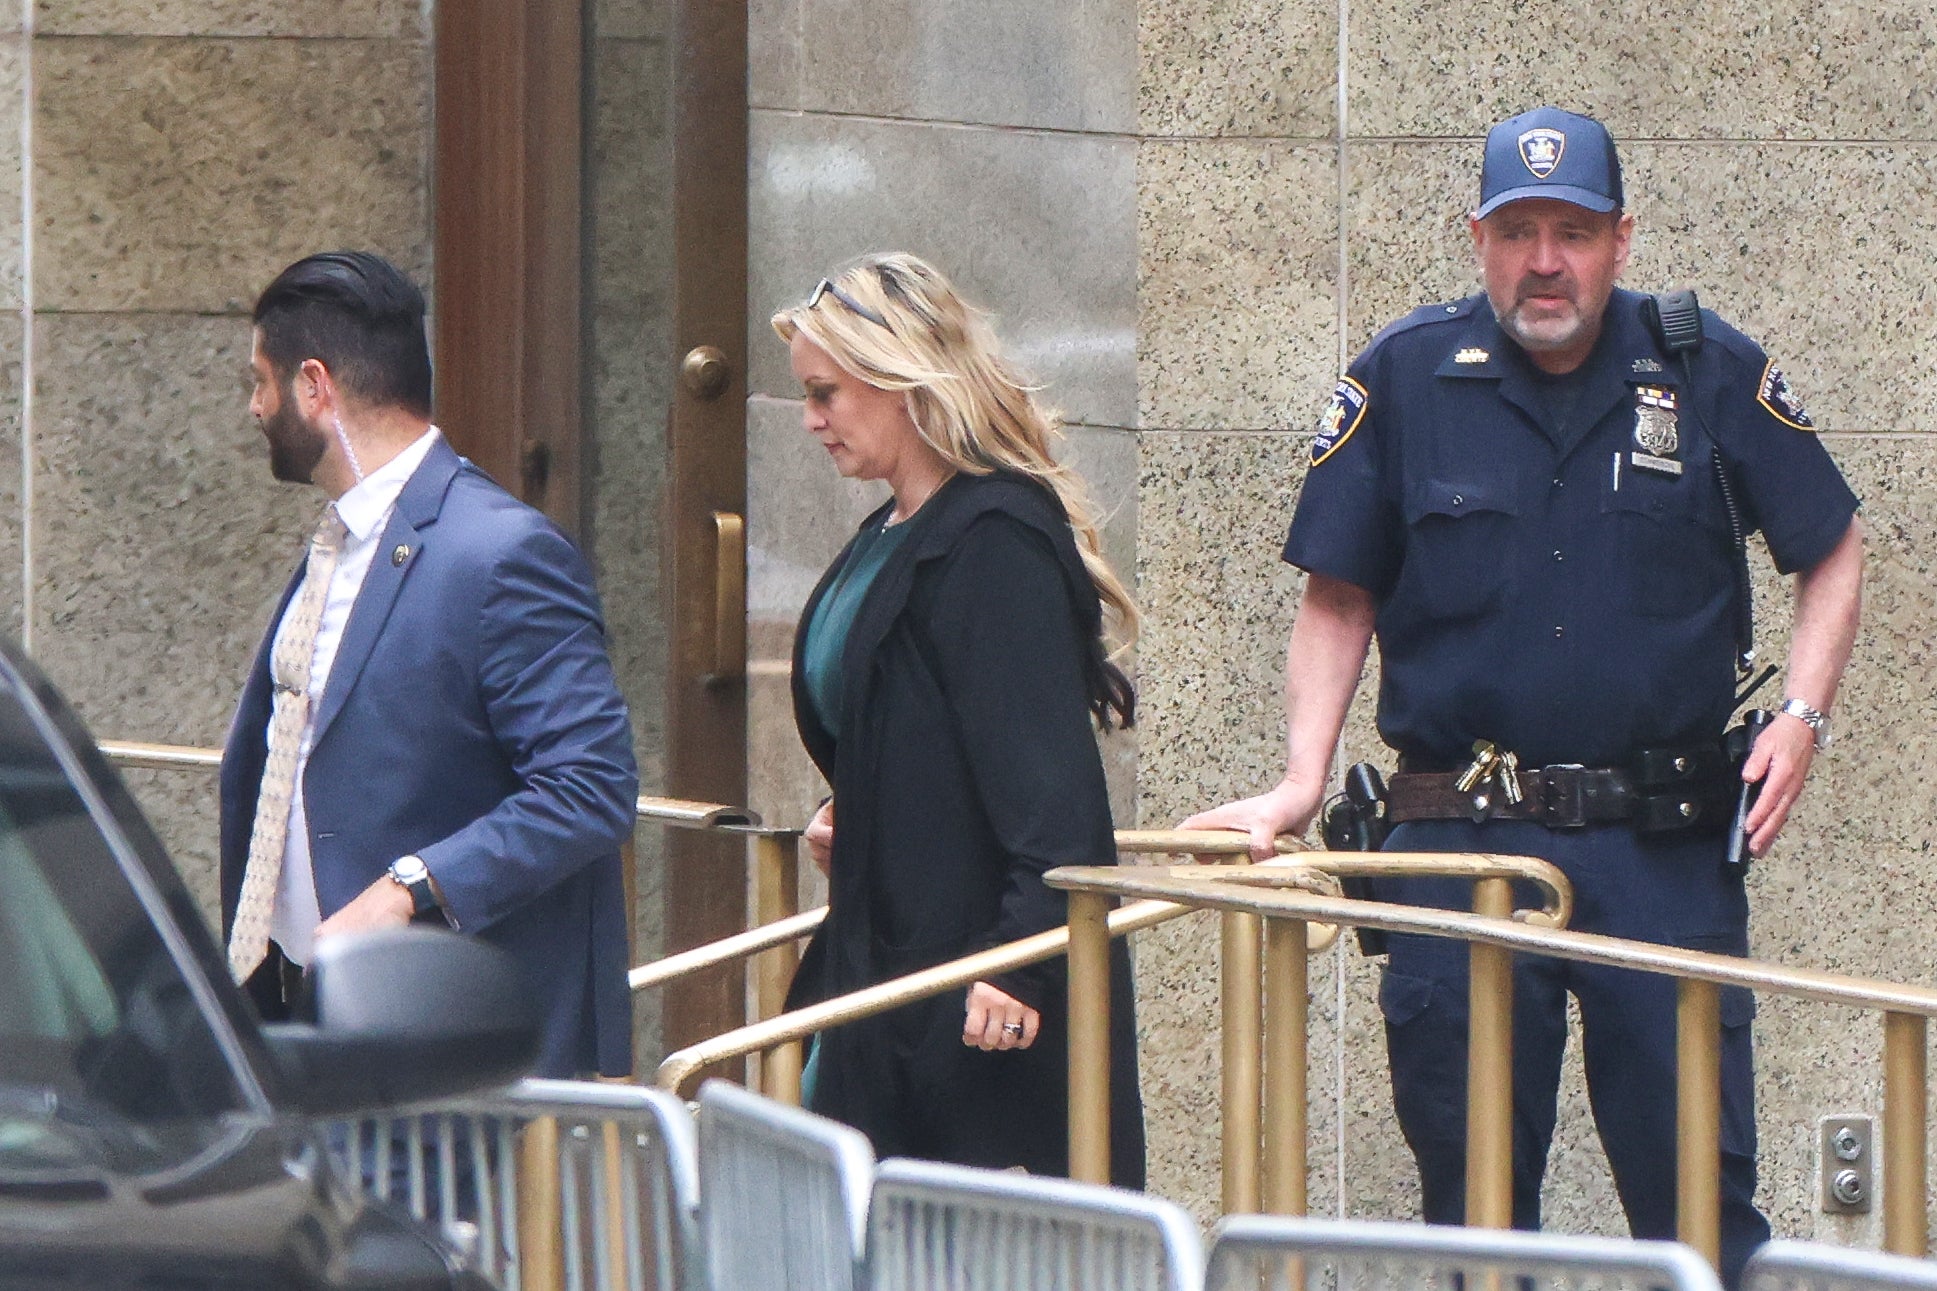 Stormy Daniels leaves court after concluding her testimony in Donald Trump’s hush money trial